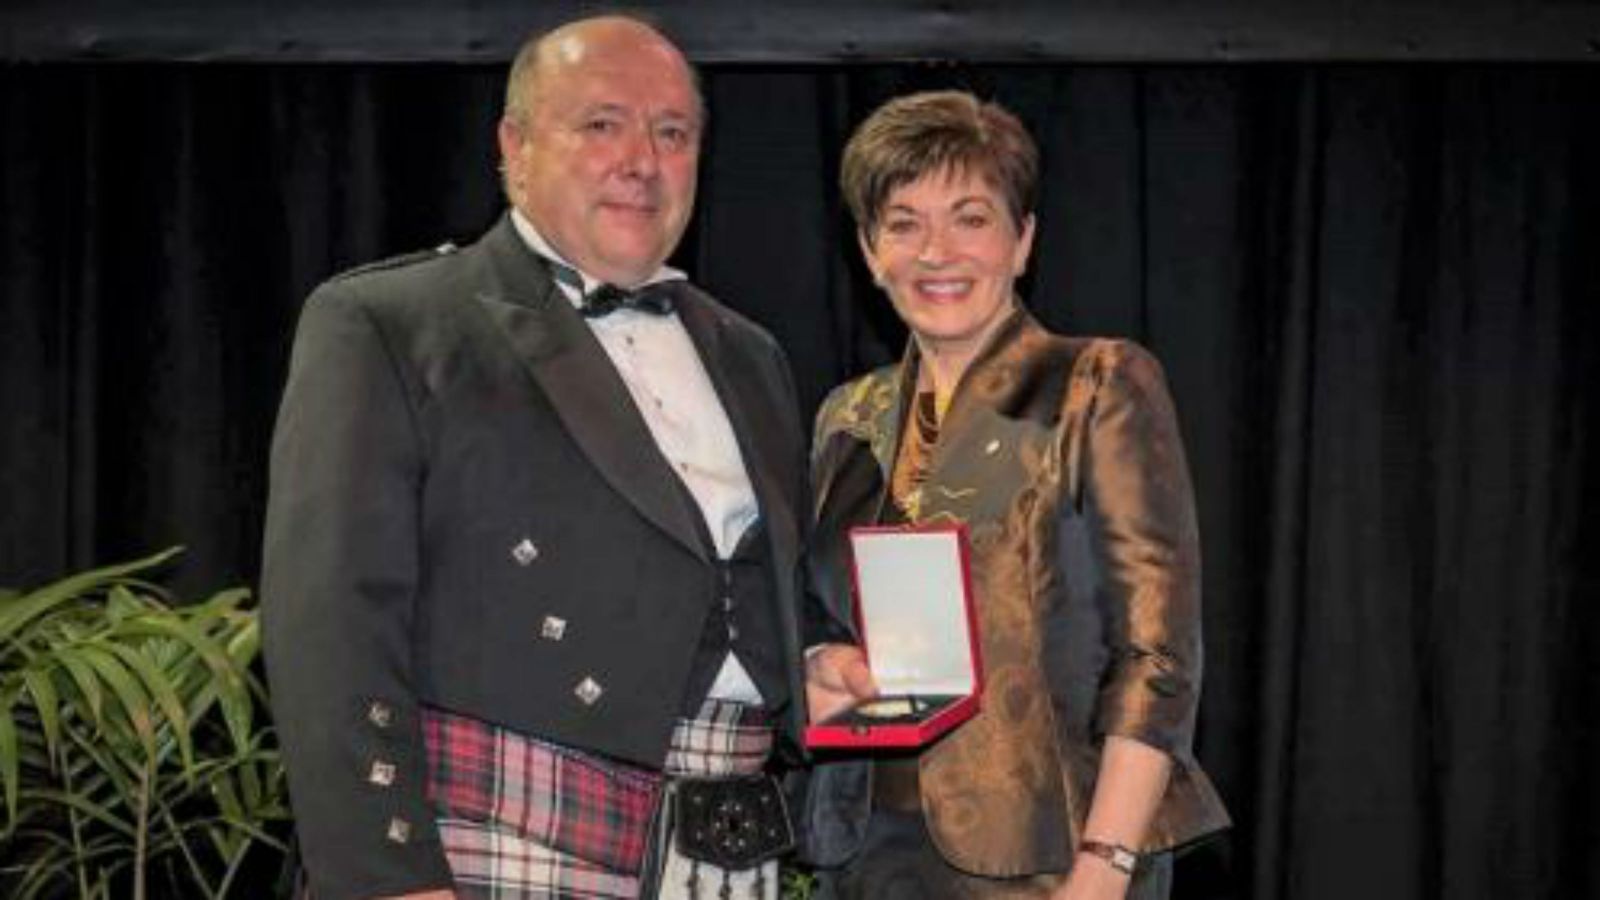 Professor Rod Downey being awarded the Rutherford Medal by the Governor-General of New Zealand, Her Excellency Dame Patsy Reddy, at 2018 Research Honours Aotearoa.